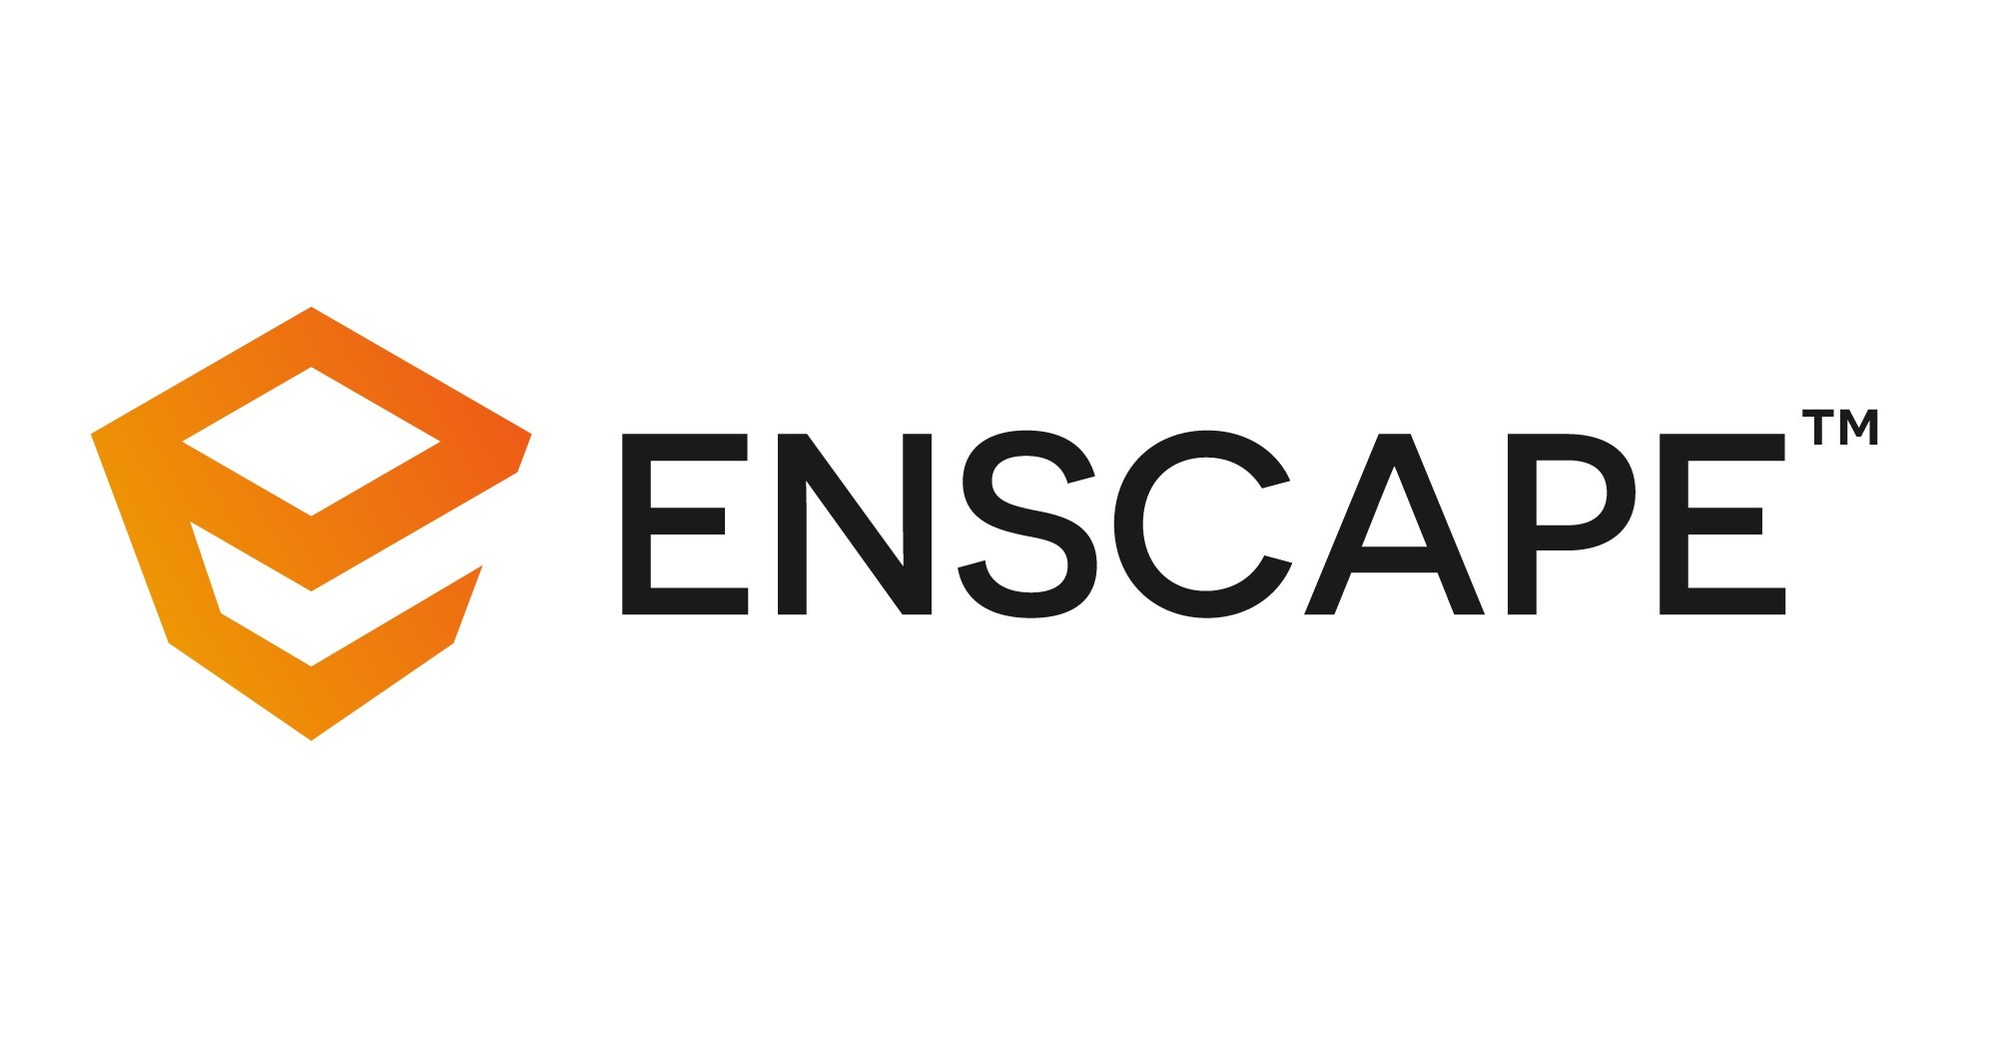 Enscape Helps Architects Bring Their Designs Closer to Reality NVIDIA DLSS Support and a New Material